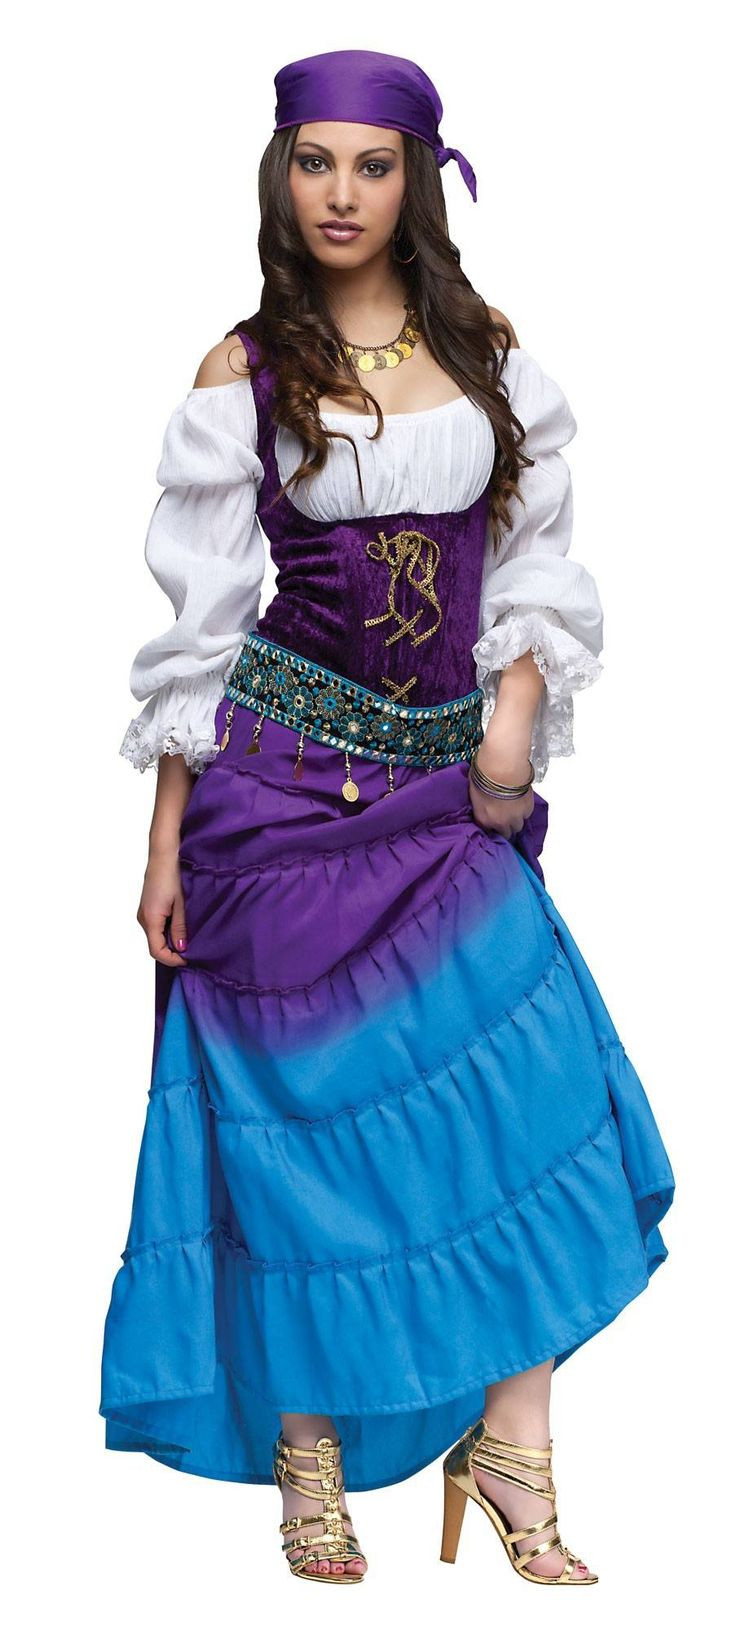 The 35 Best Ideas for Gypsy Costume Diy - Home, Family, Style and Art Ideas